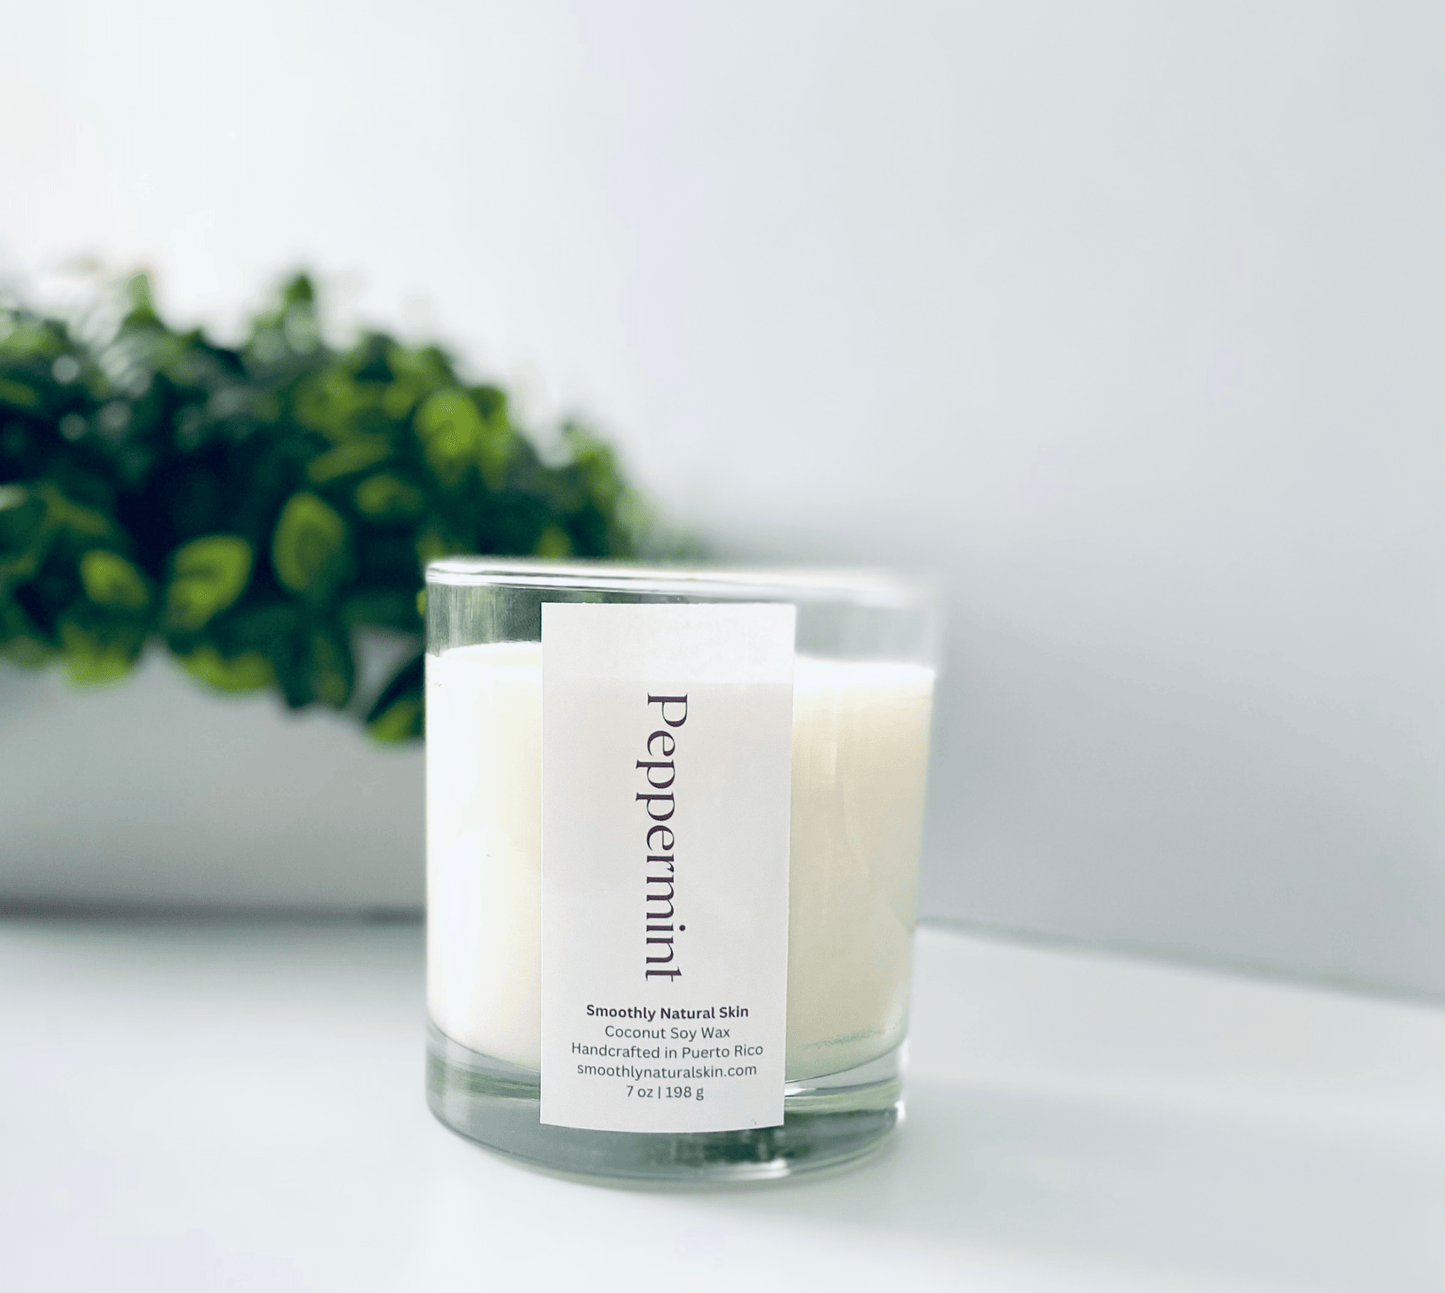 Peppermint Candle smells just like peppermint candy. It has a is a very fresh, clean, true peppermint scent. A Best Seller!